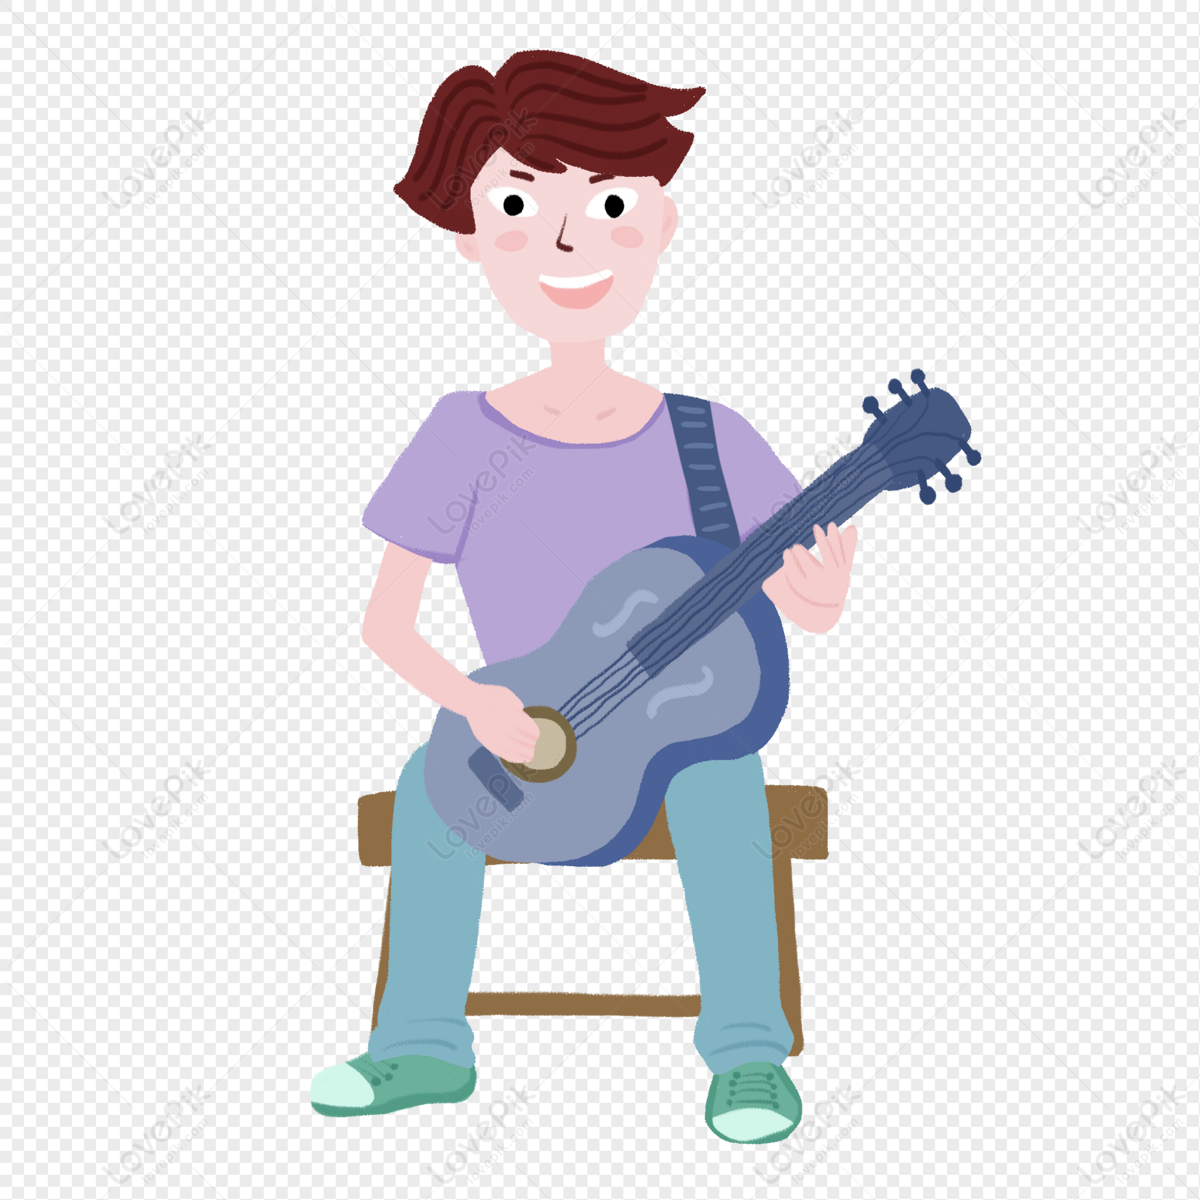 Music Festival Boy Playing Guitar PNG Transparent Background And Clipart  Image For Free Download - Lovepik | 401303660